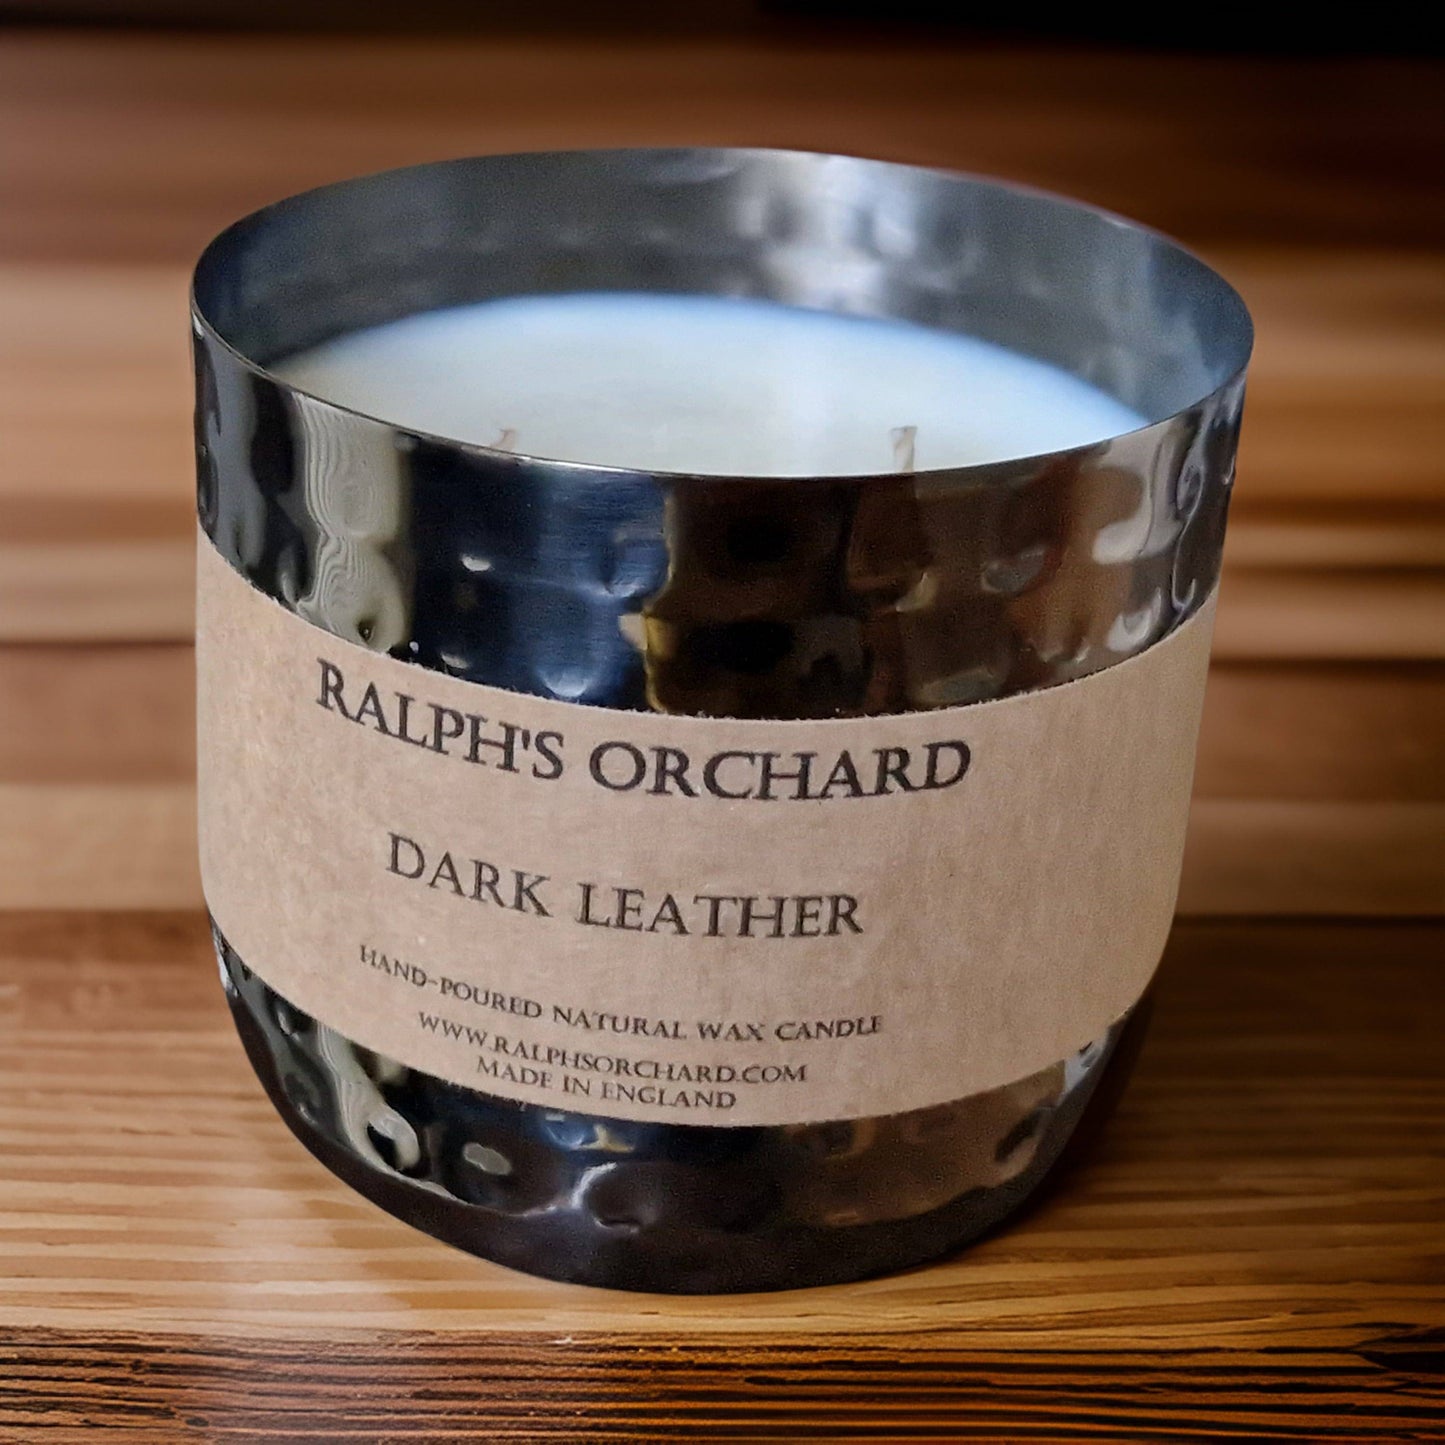 Dark Leather scented natural candle